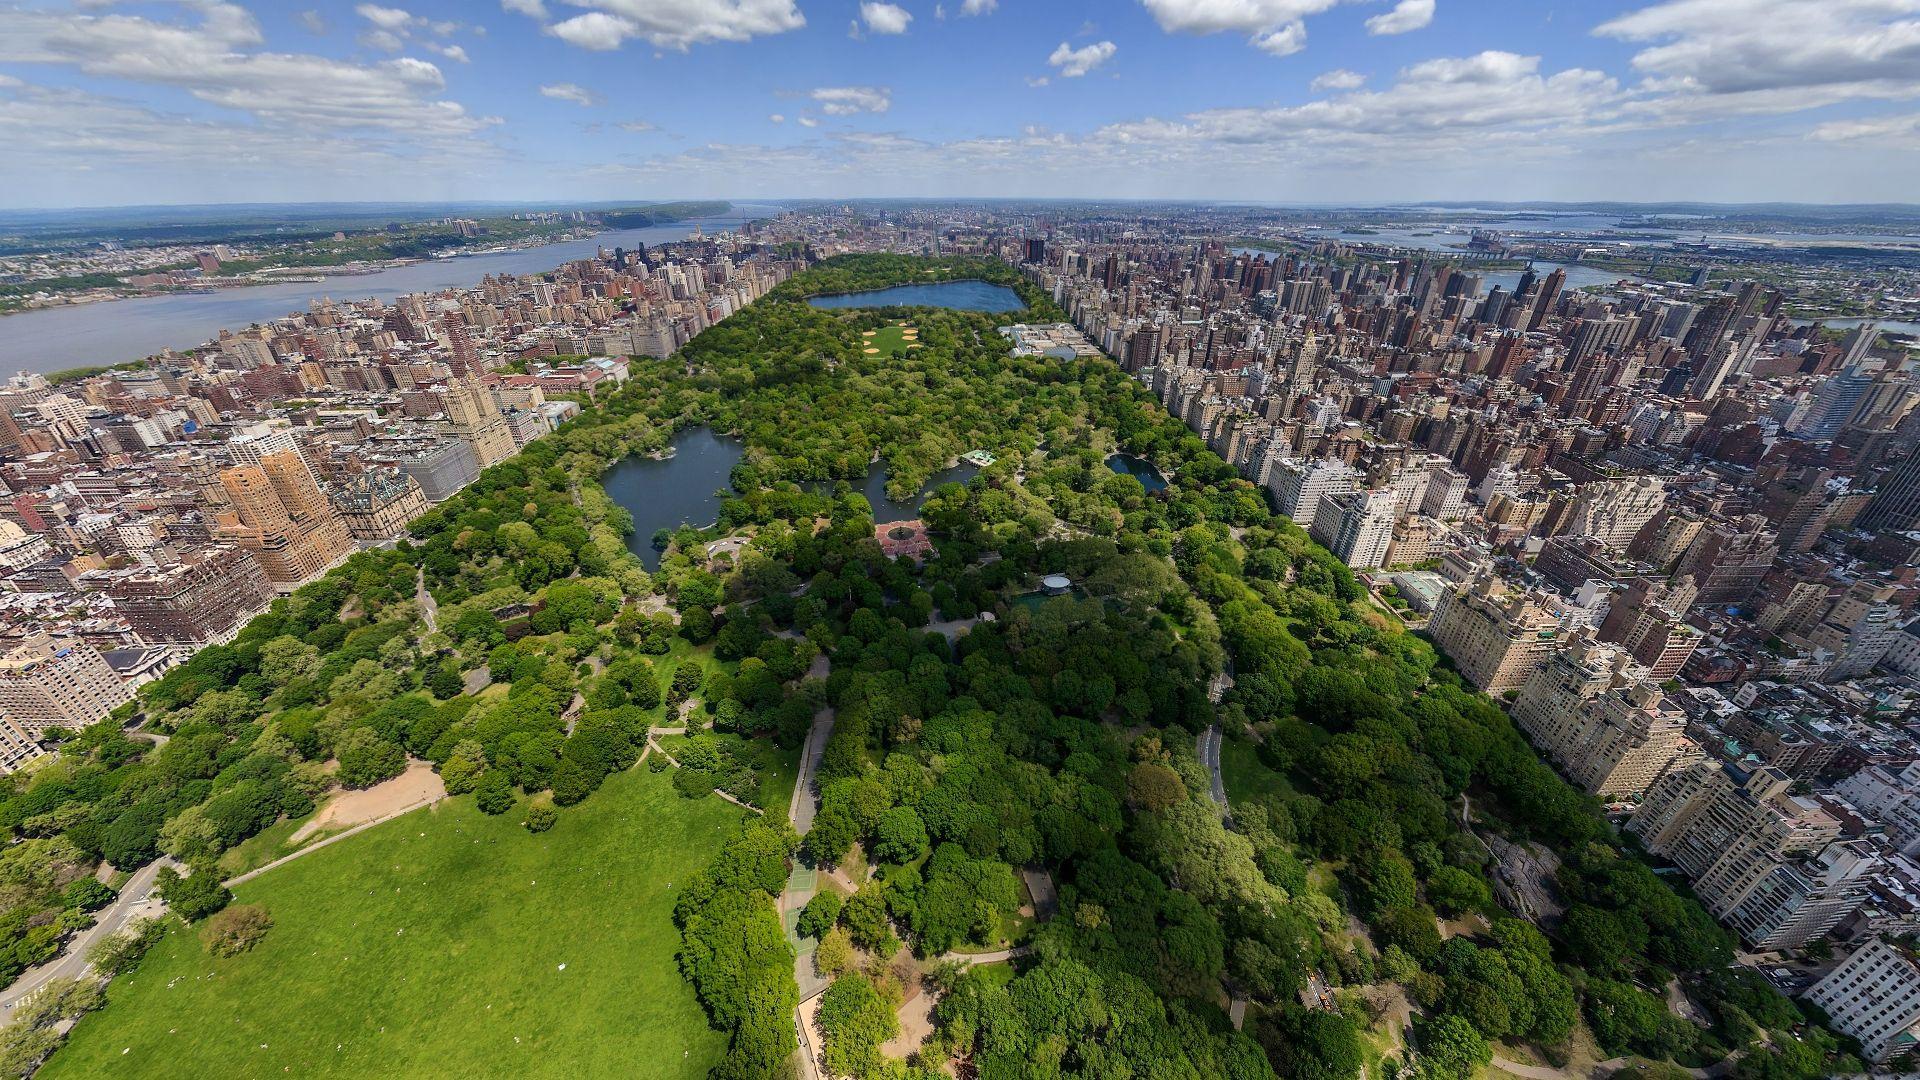 Download Wallpaper 1920x1080 new york, central park, top view Full